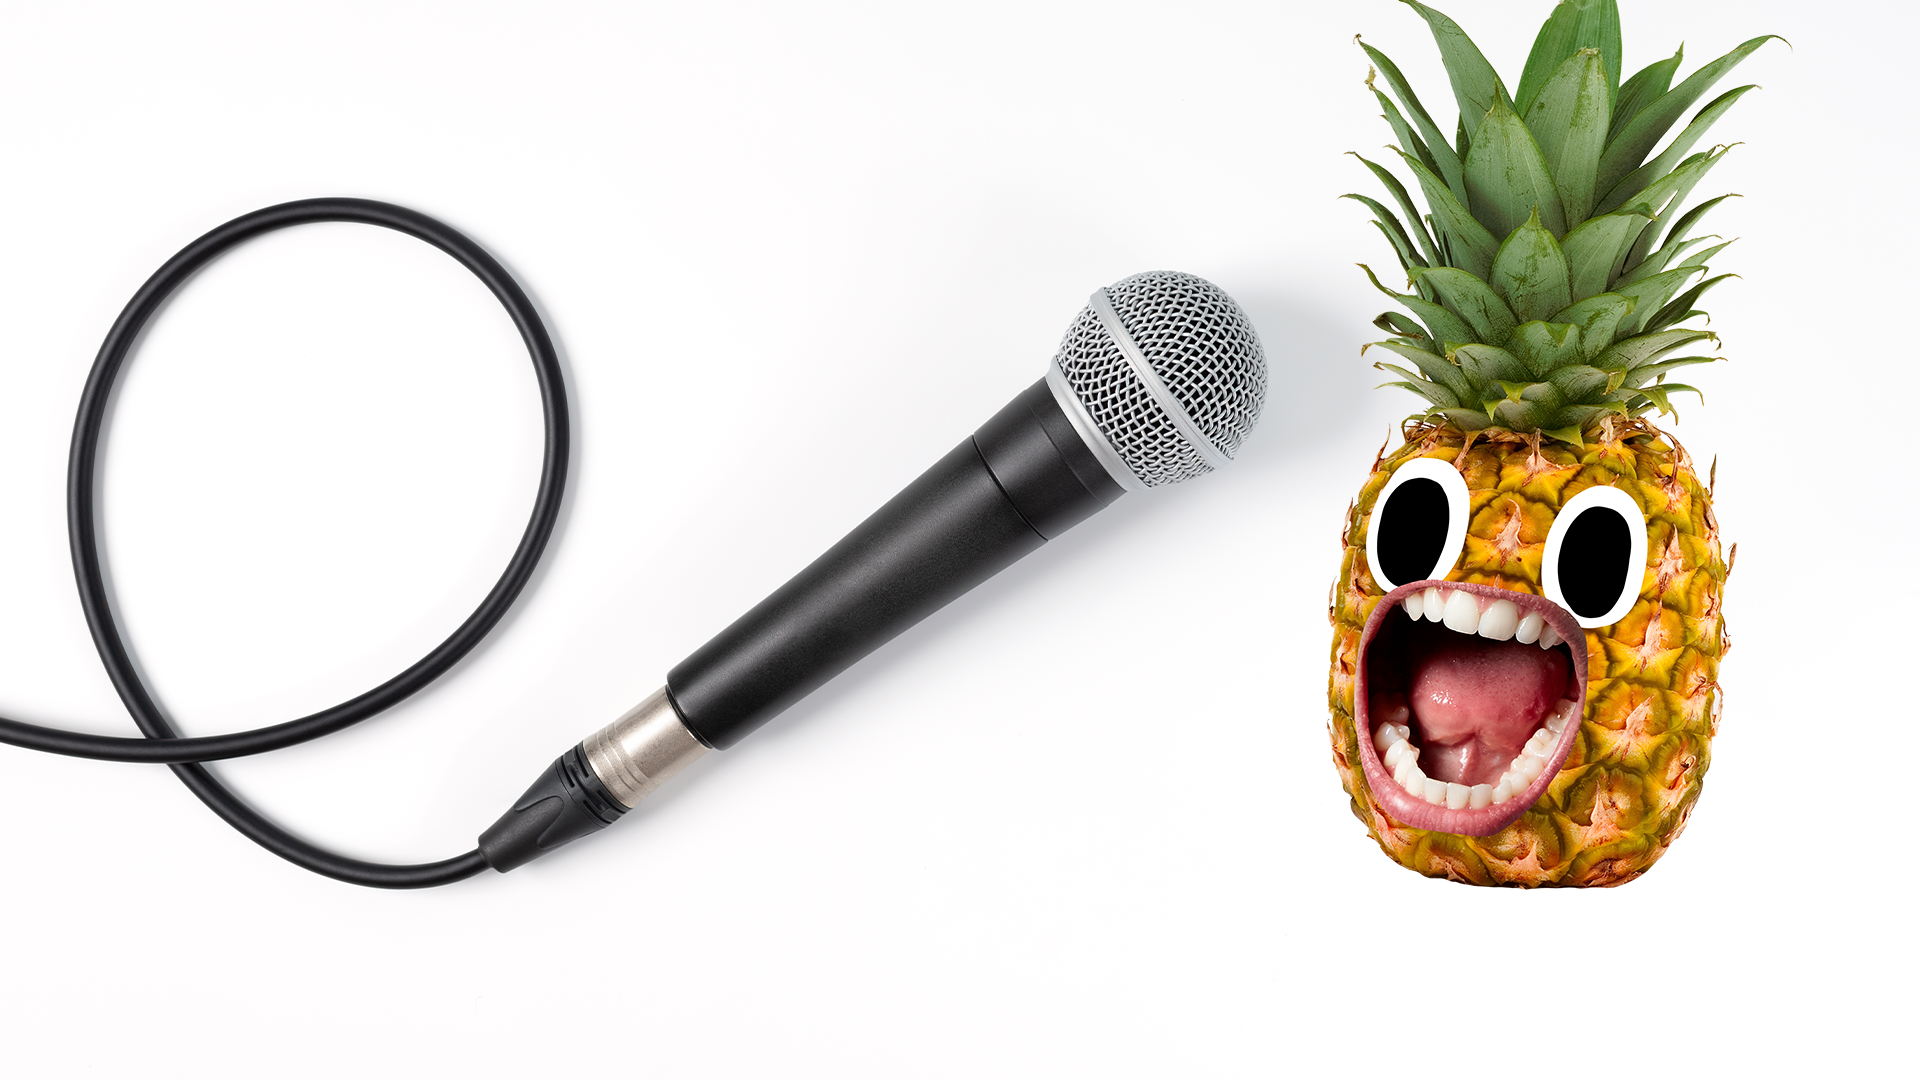 Screaming pineapple with microphone on white background